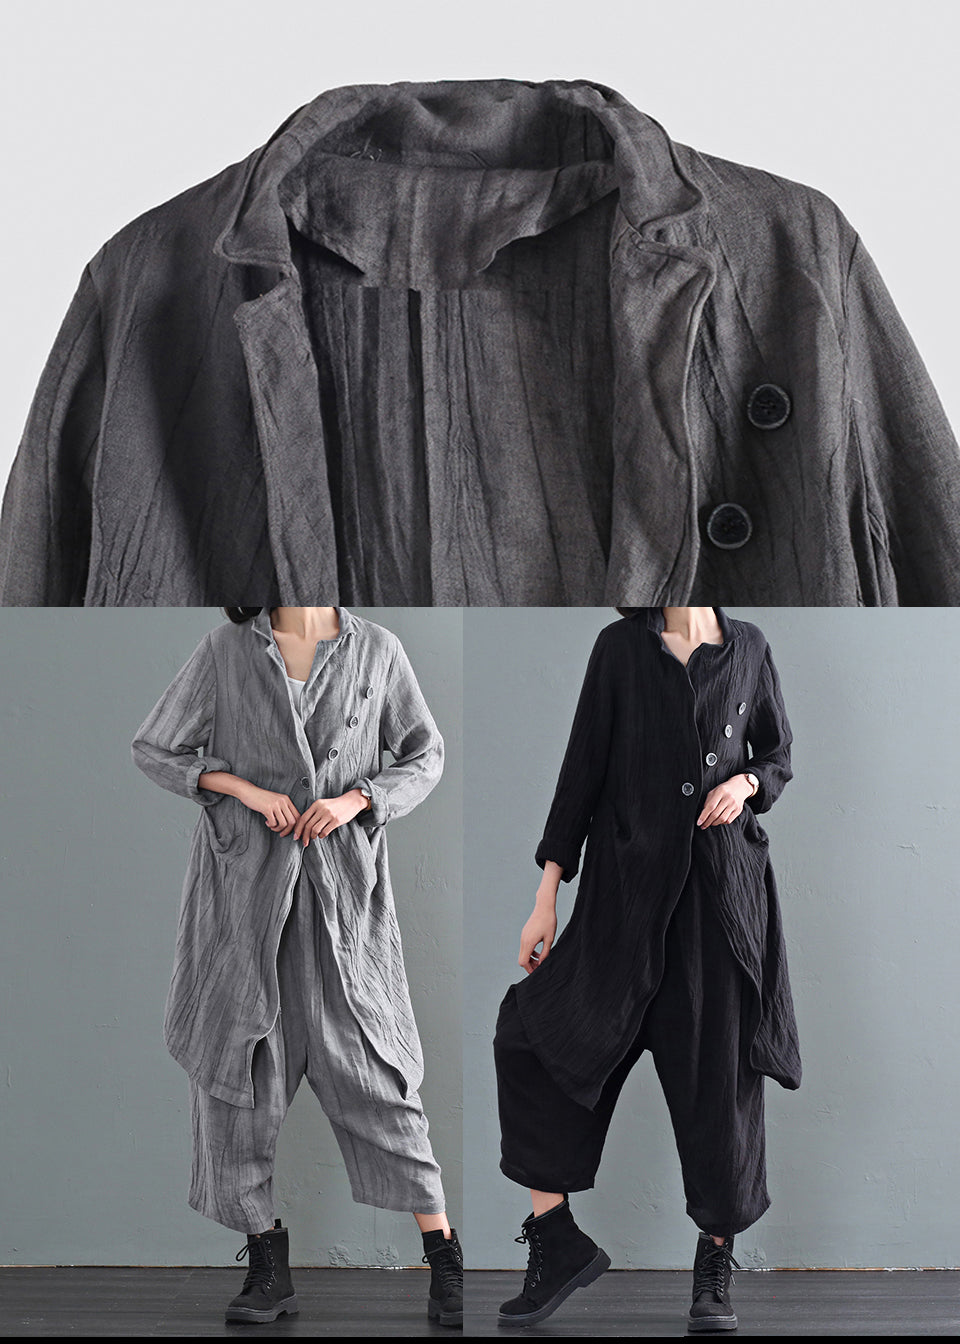 Black Oversized Linen Trench Coats Wrinkled Button Fall